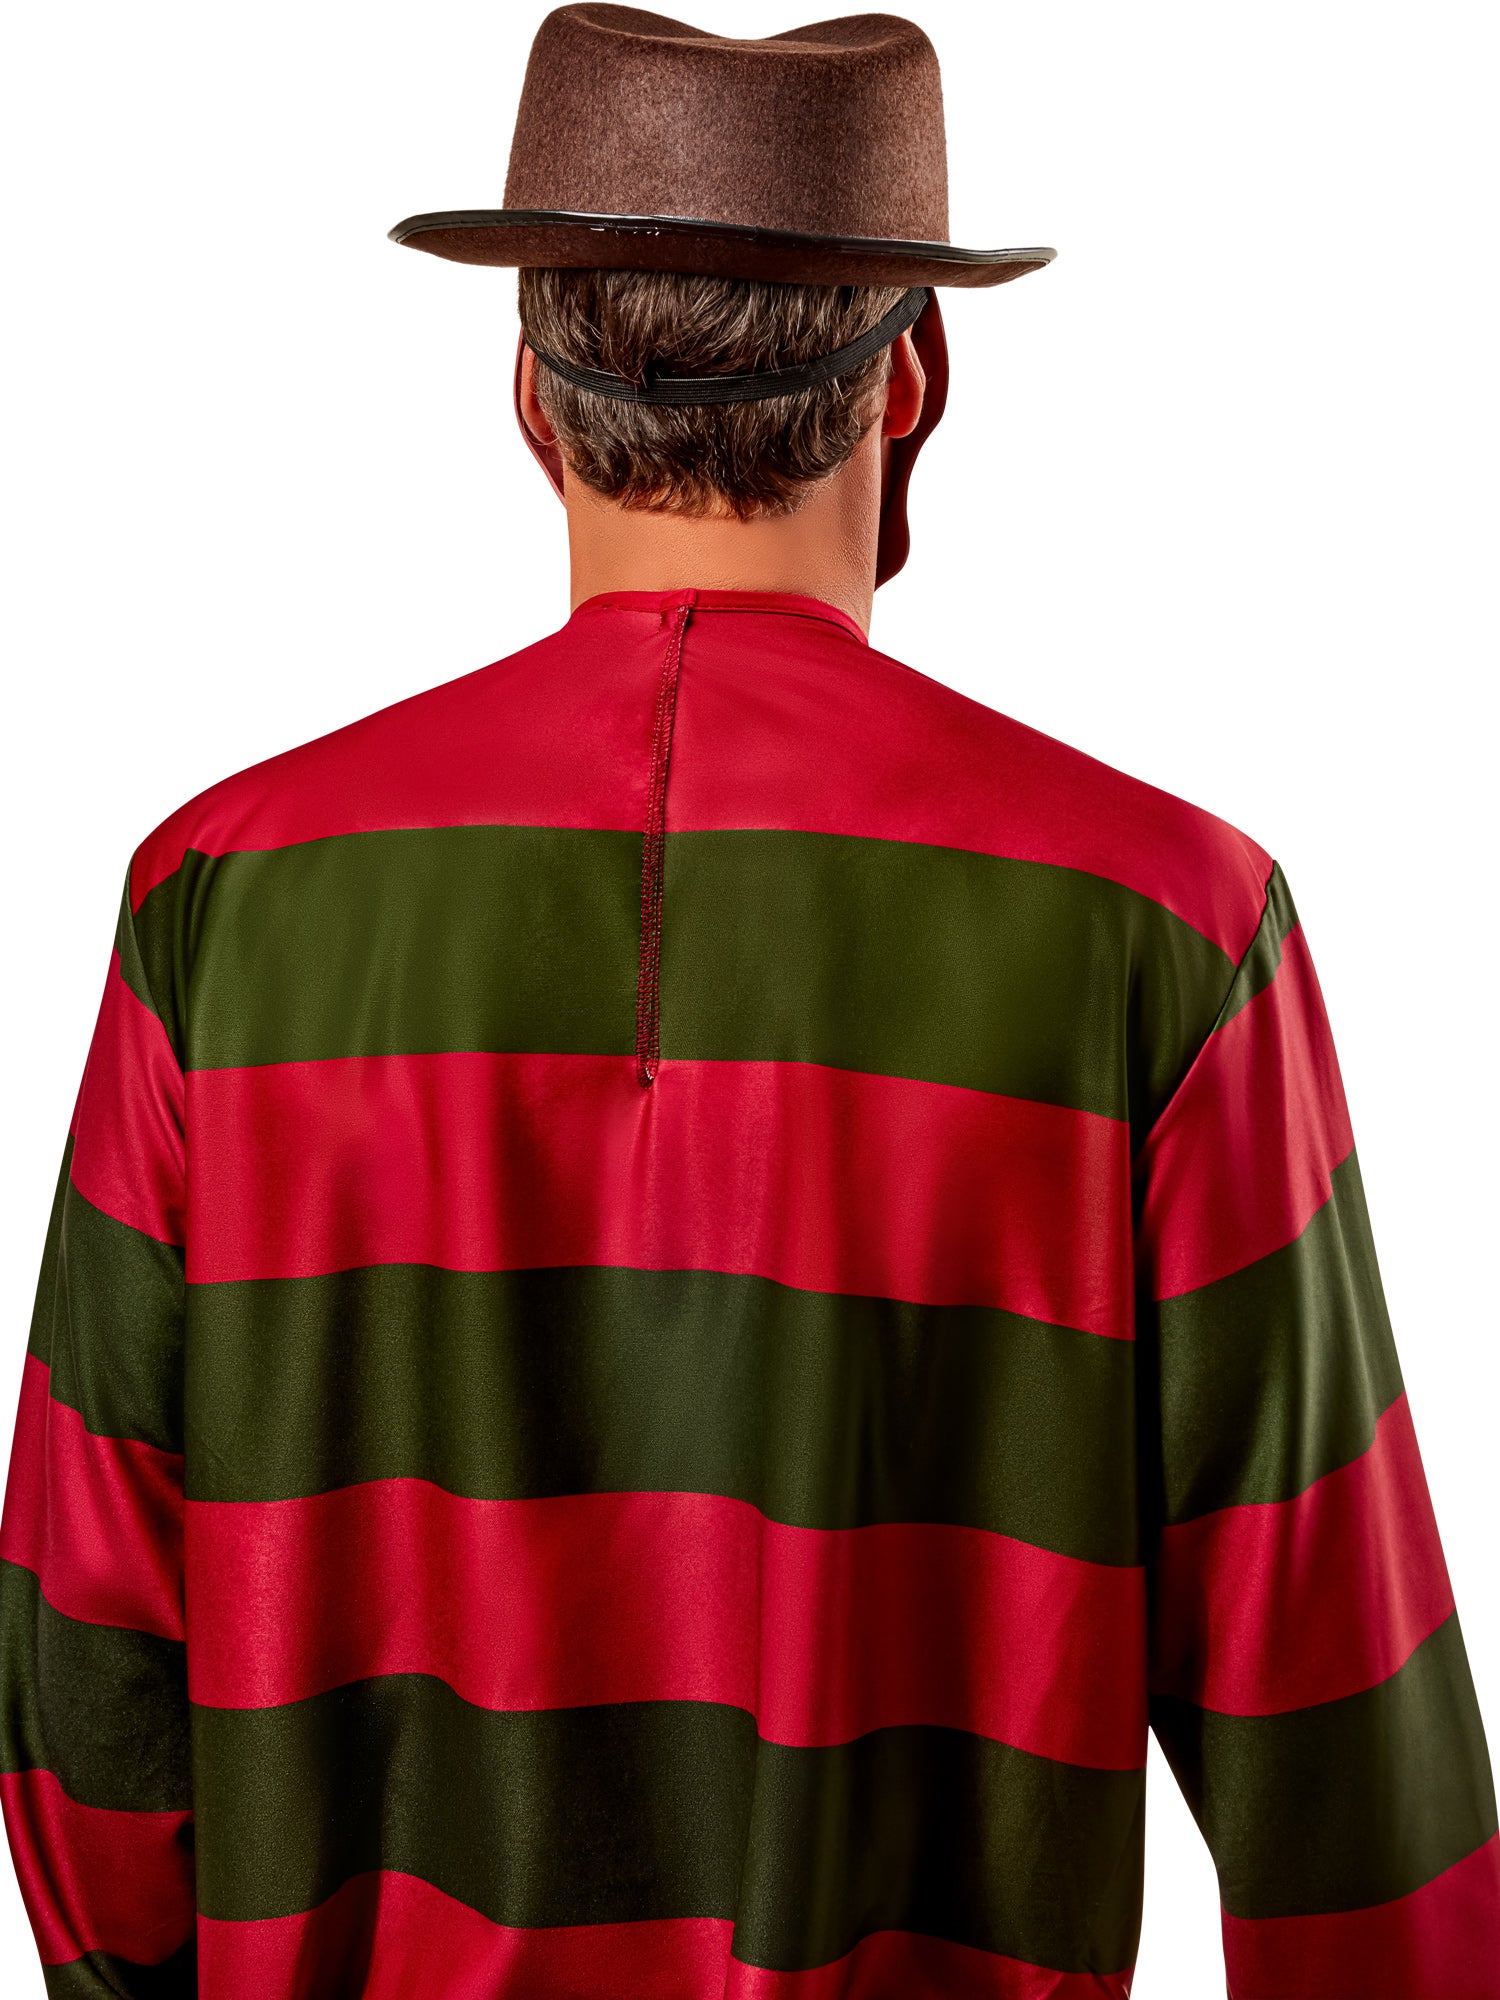 Adult A Nightmare on Elm Street Freddy Krueger Sweater and Mask - costumes.com